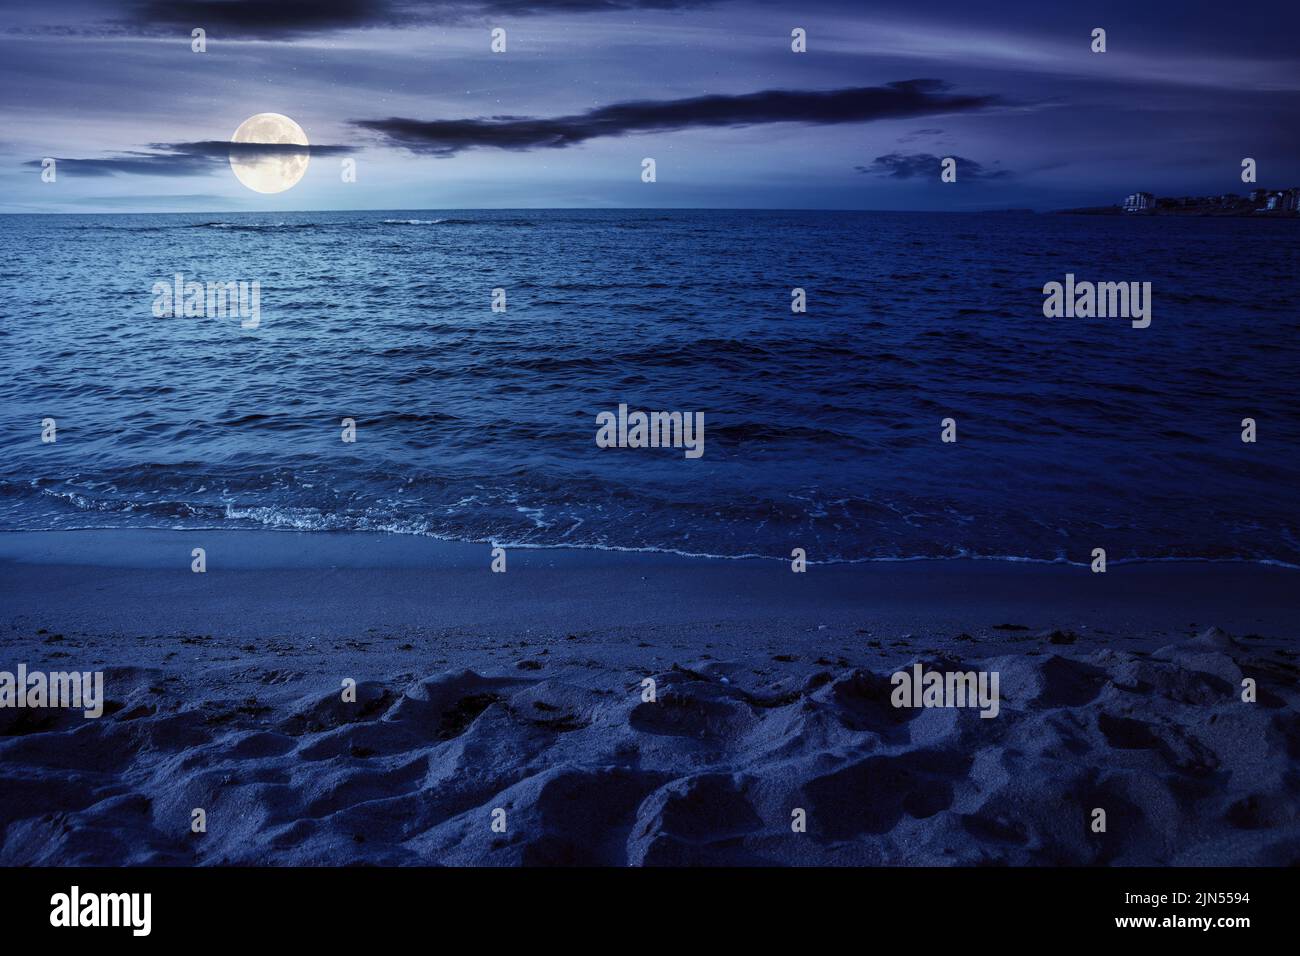 night scenery at the sea. calm waves washing the sandy beach in full moon light. transparent water and bright blue sky Stock Photo